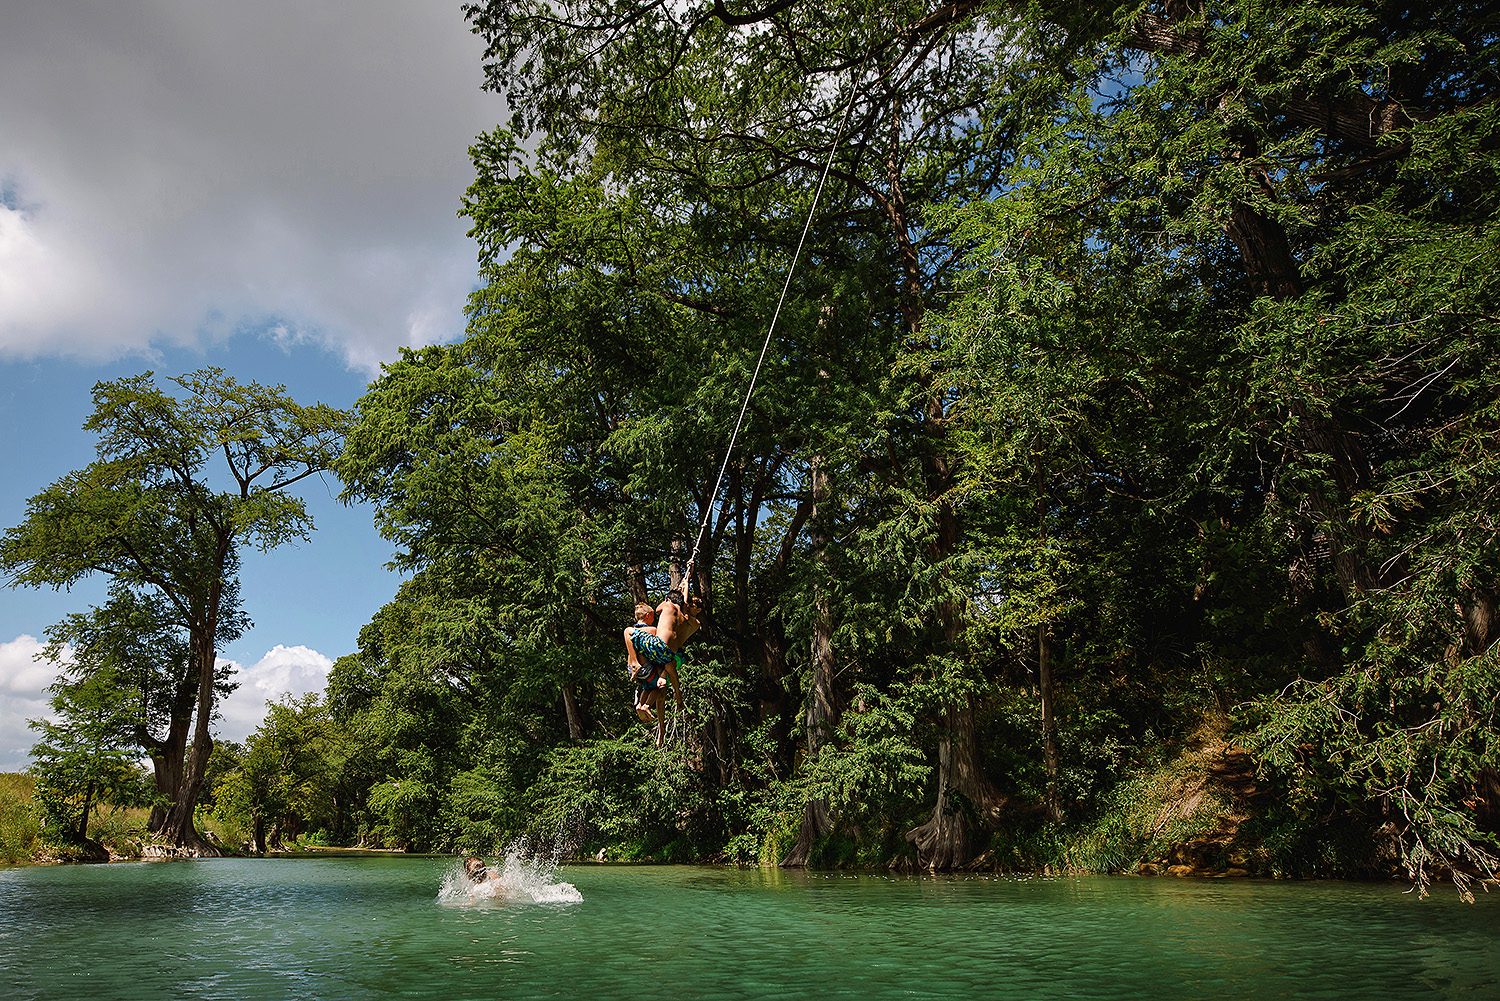 4 boys swinging over the river in Dripping Springs, Texas